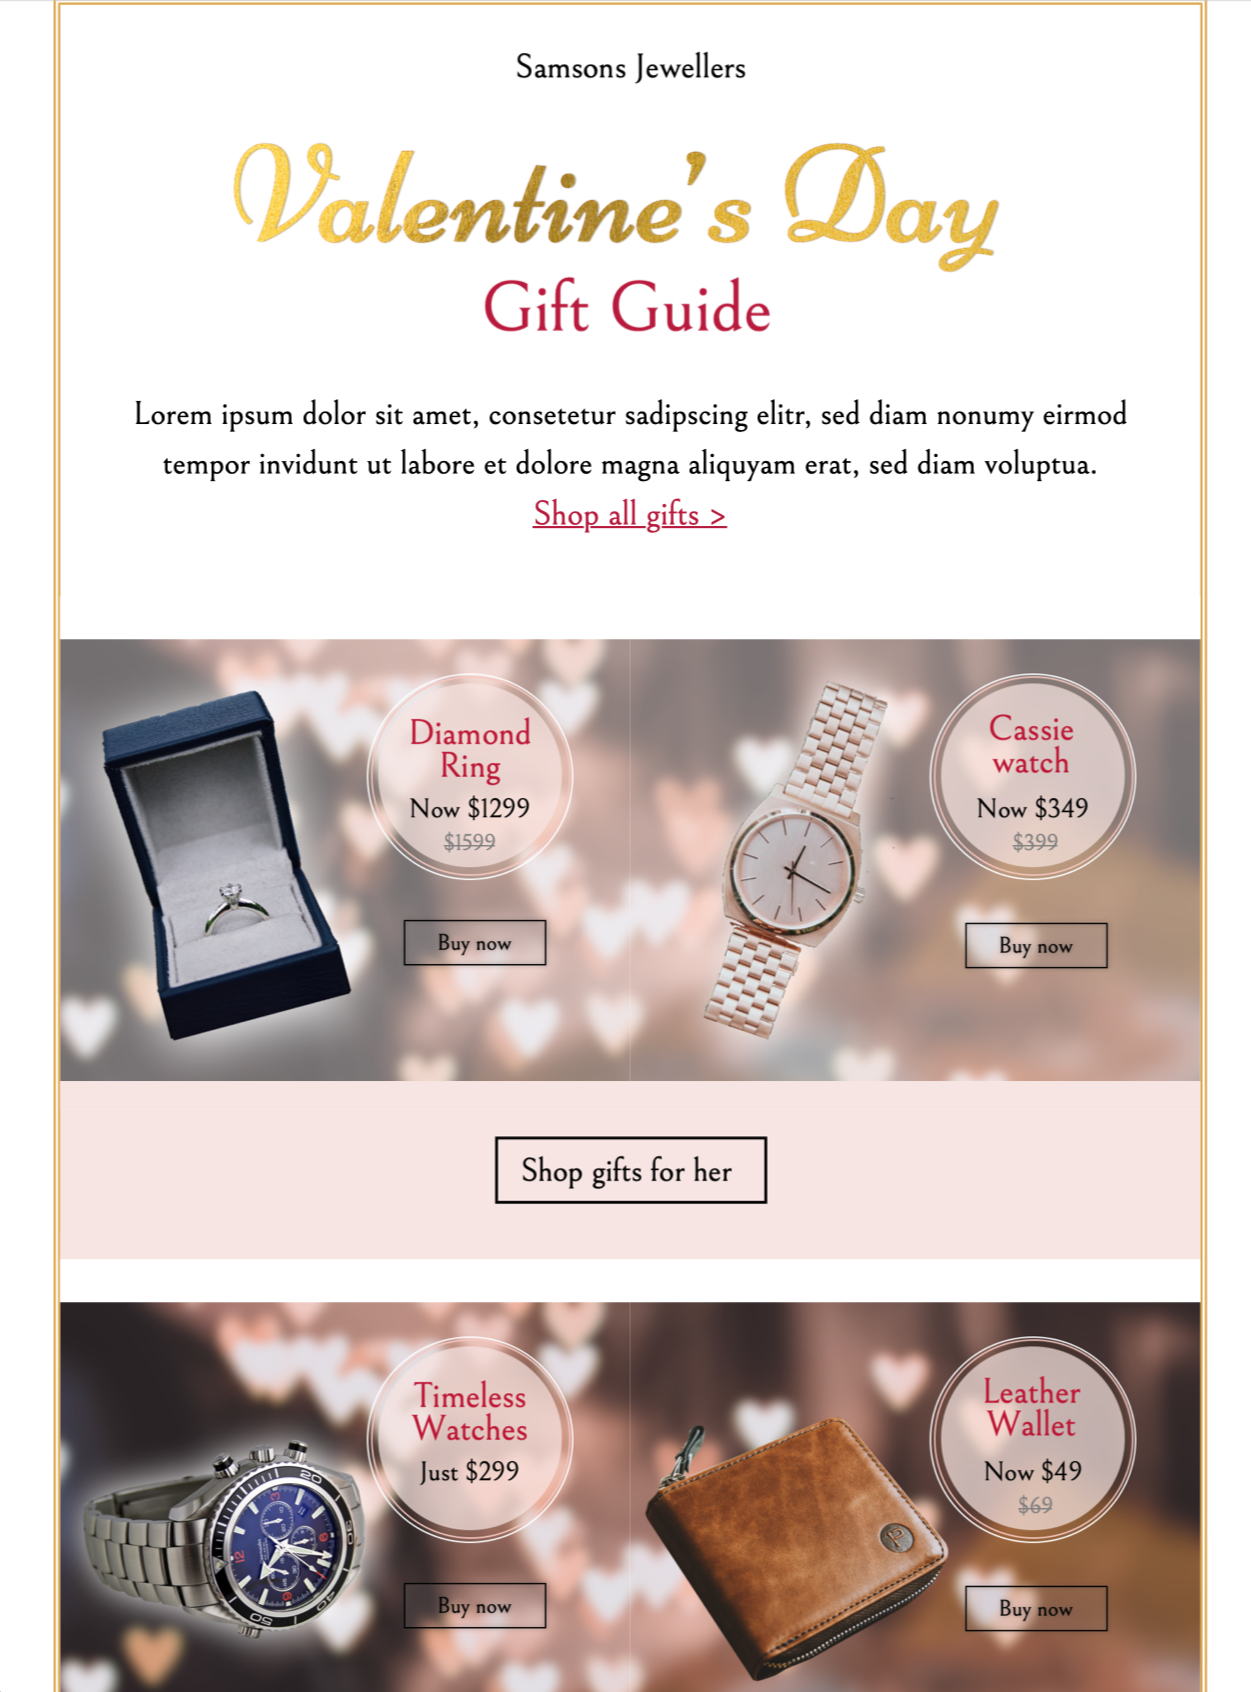 html email template for valentines day - valentines day gift guide